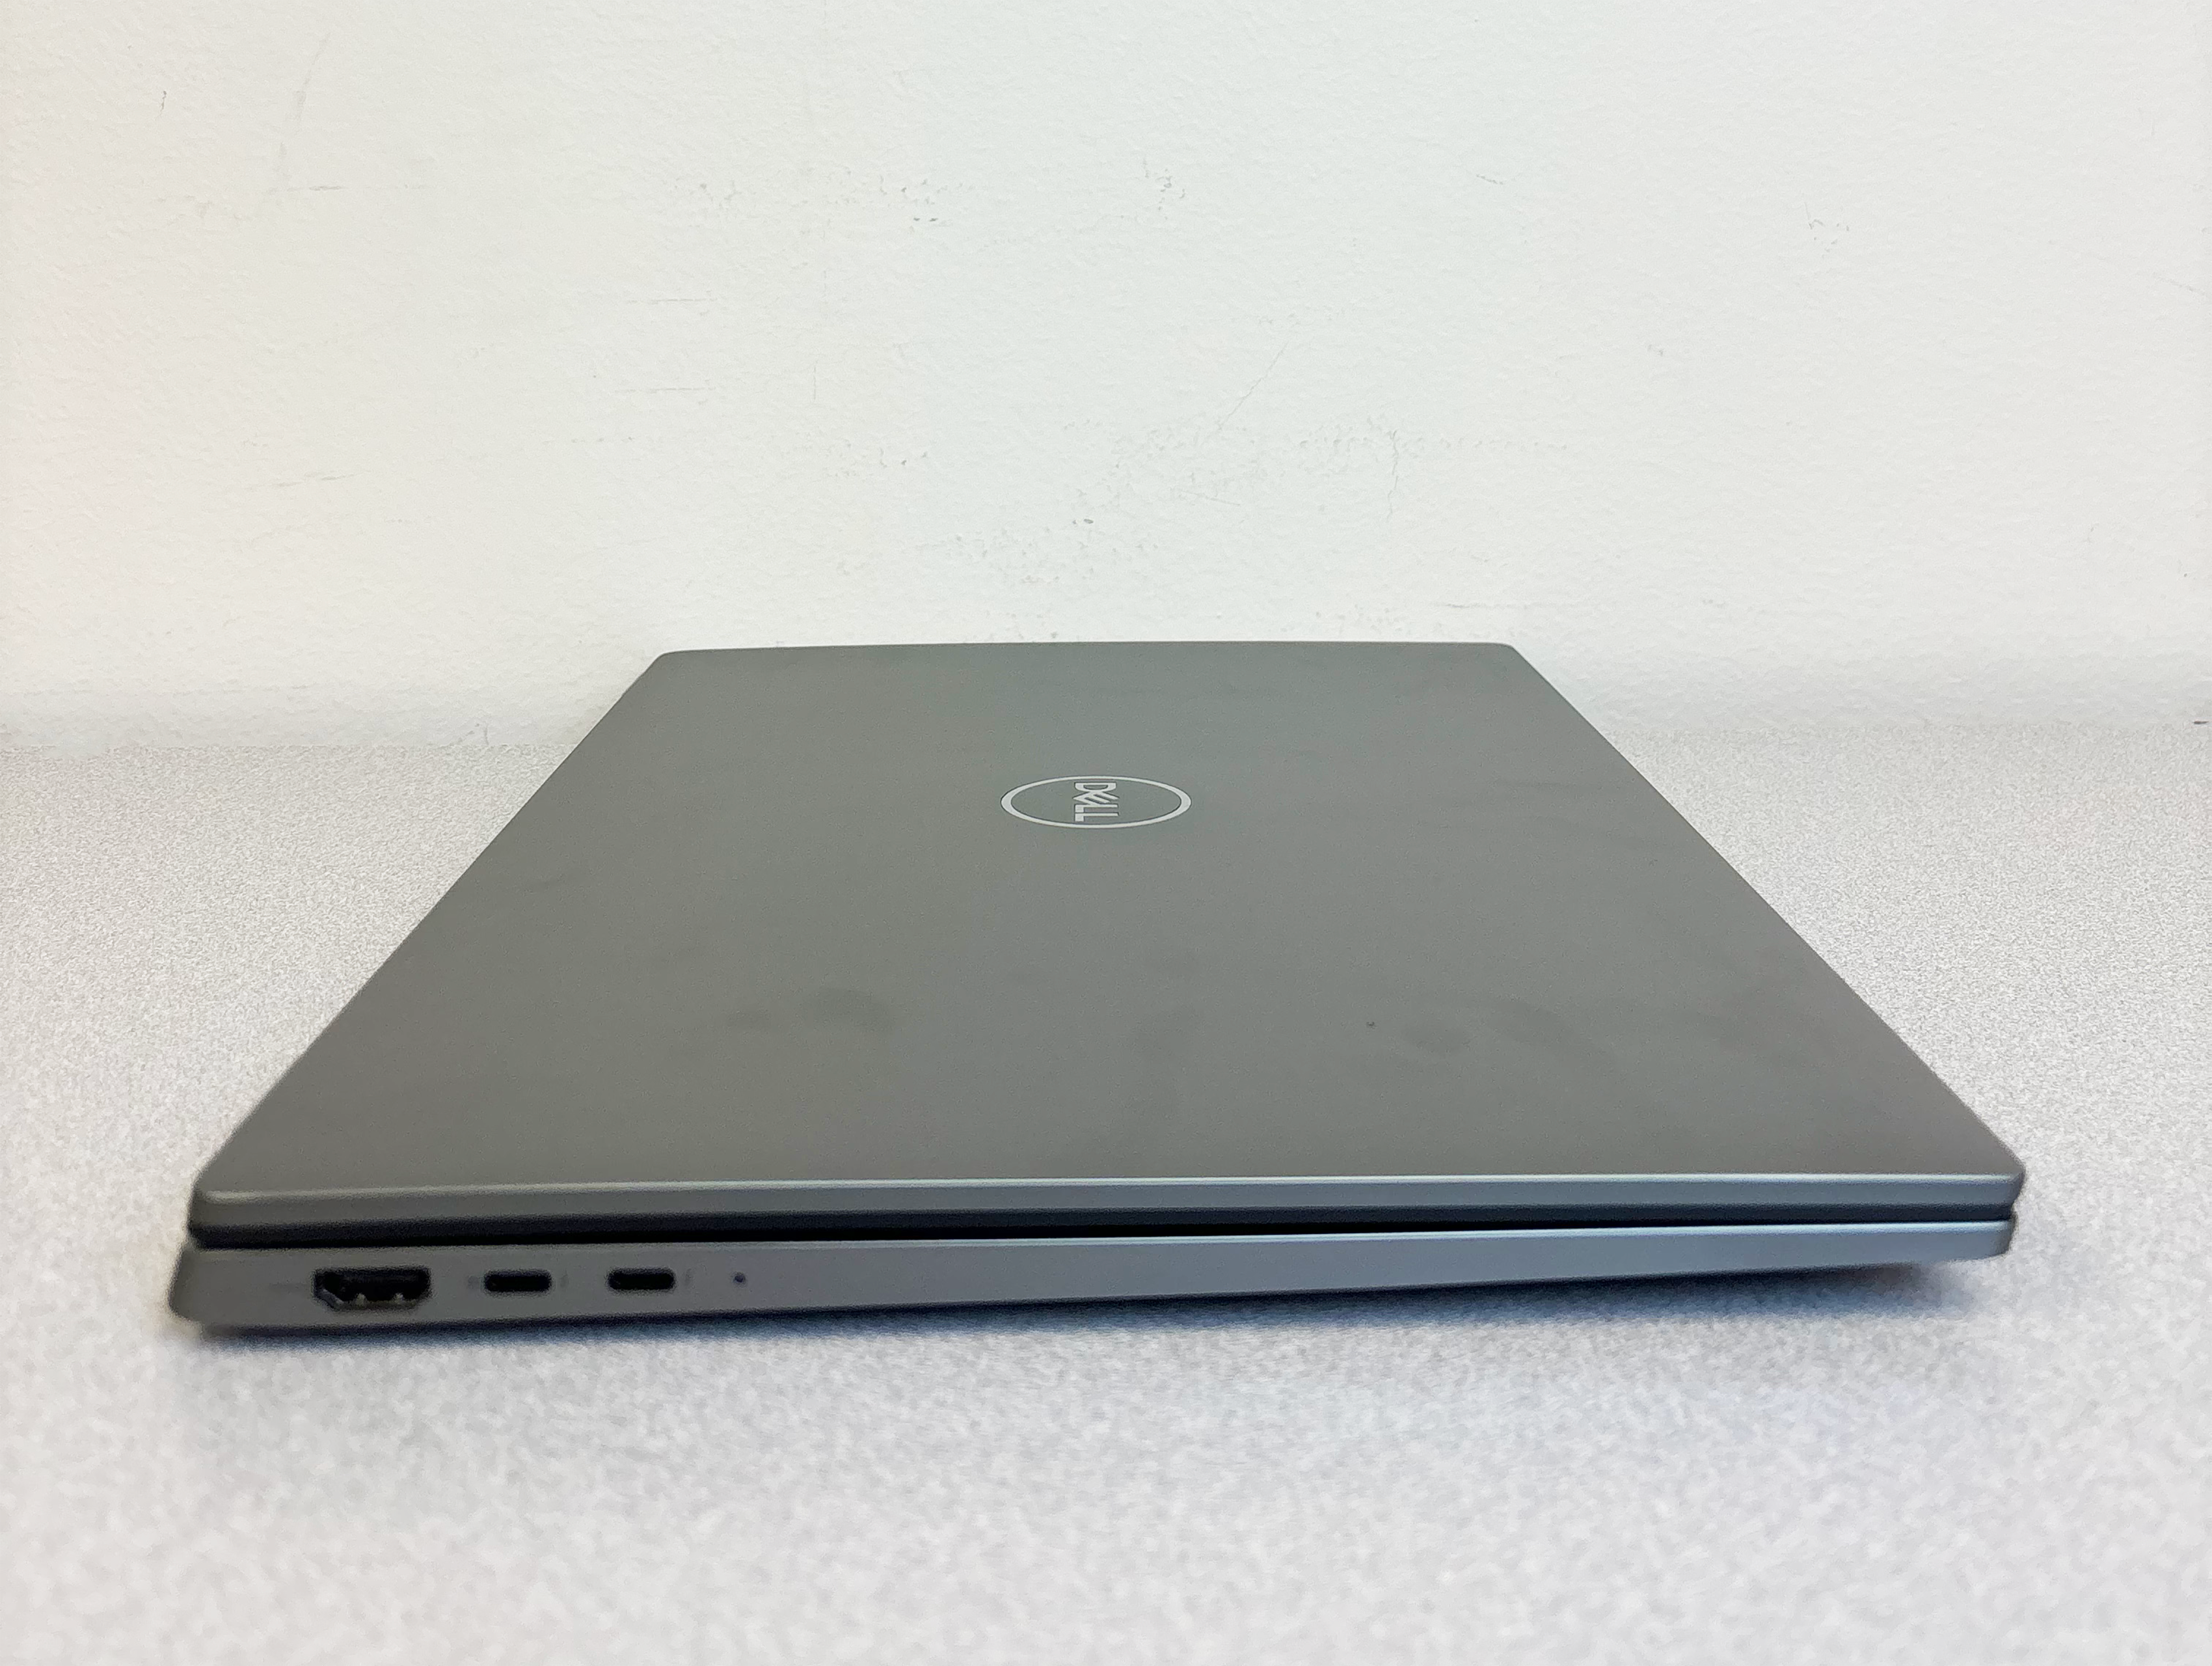 Dell Latitude leftsideview closed